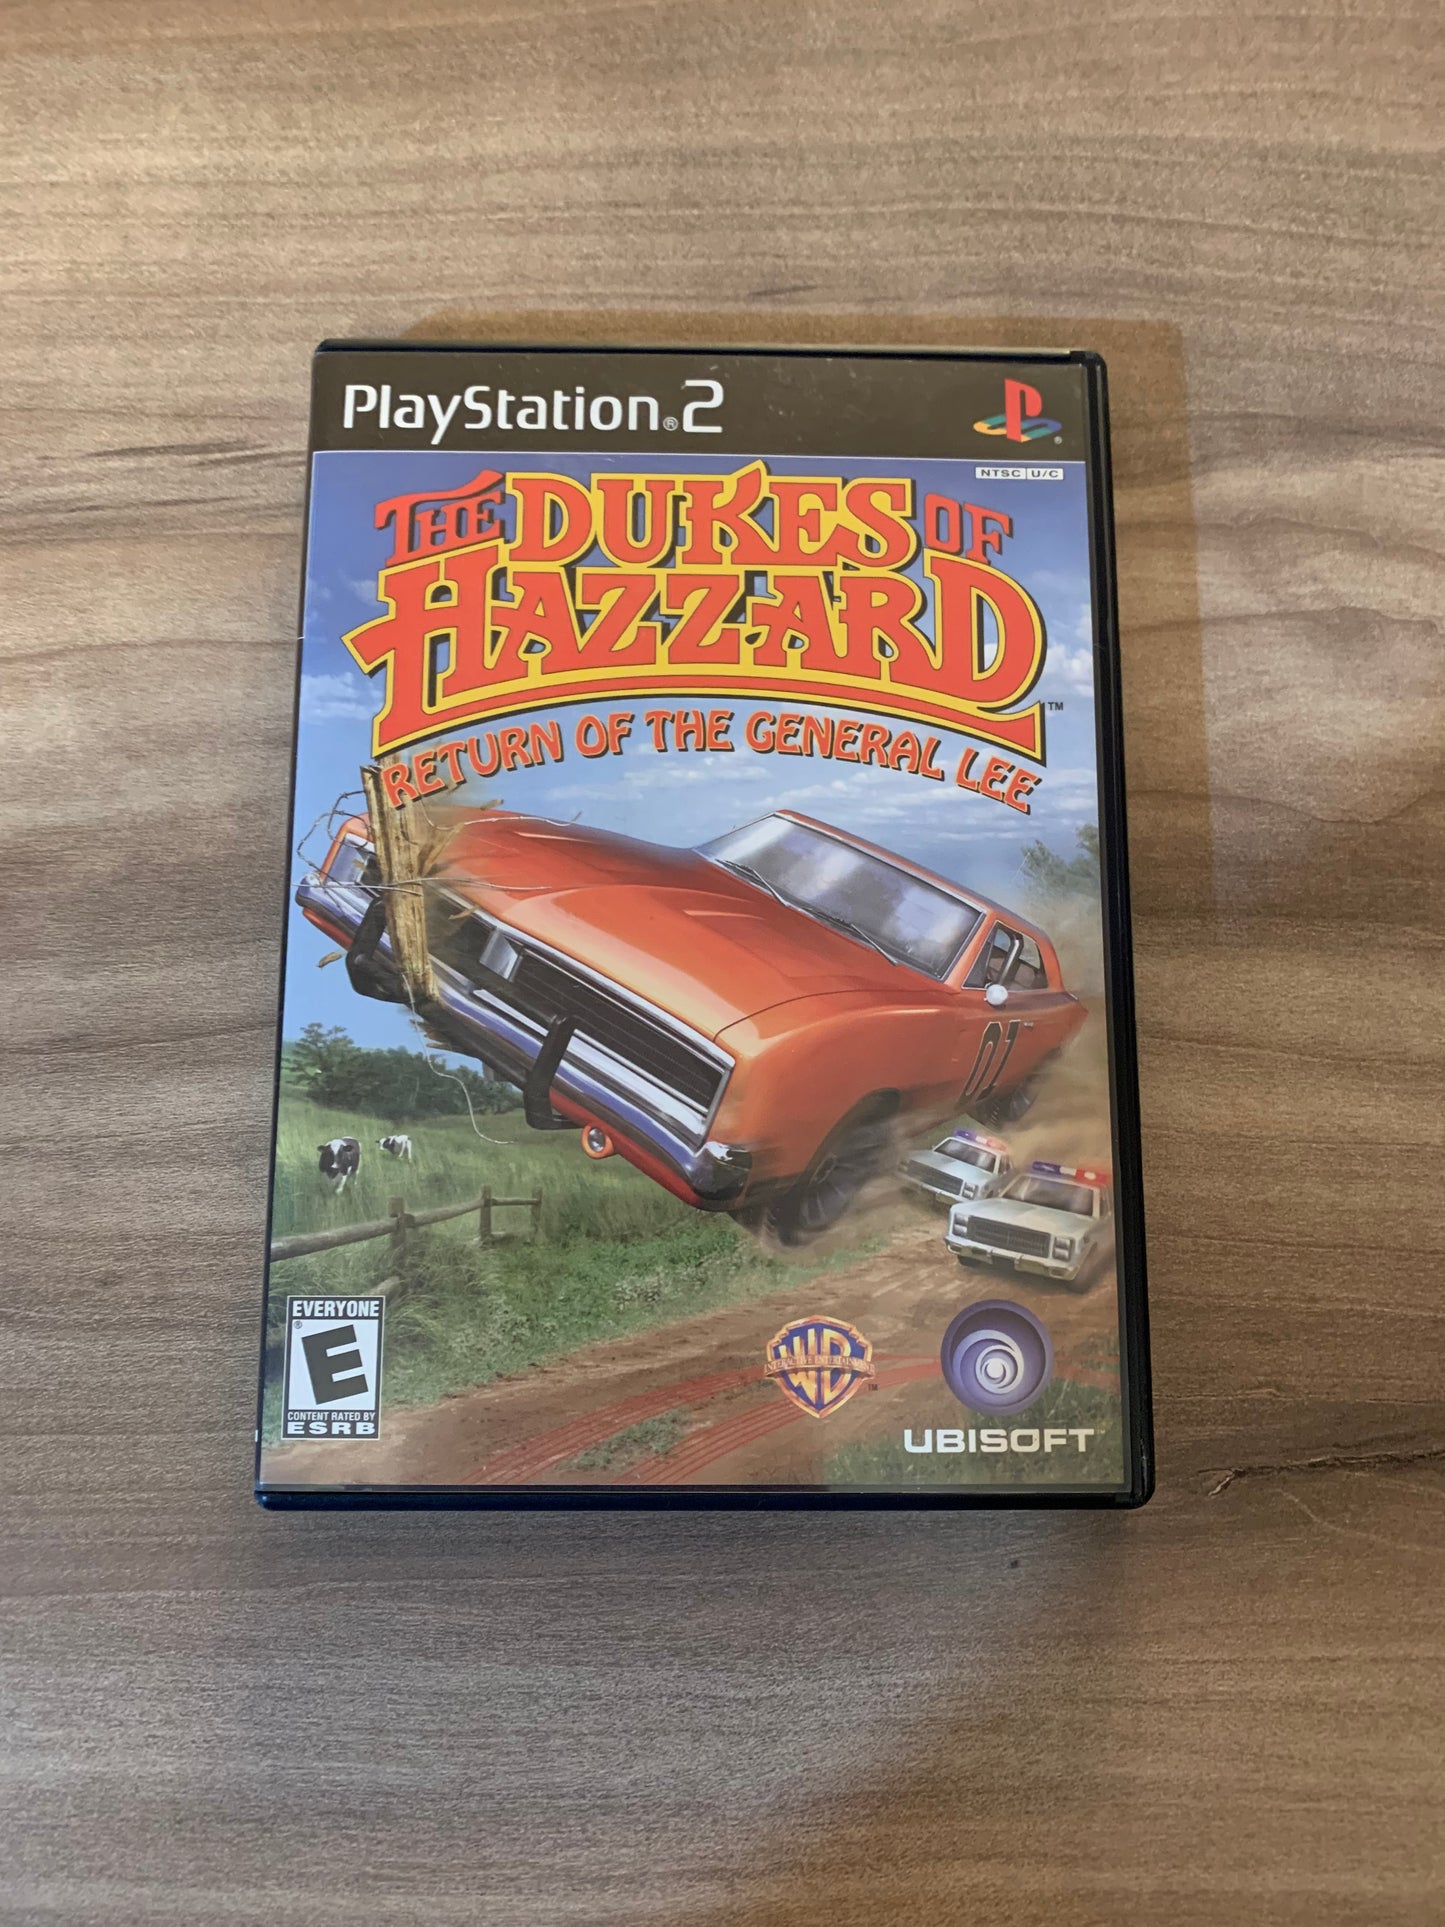 SONY PLAYSTATiON 2 [PS2] | THE DUKES OF HAZZARD RETURN OF THE GENERAL LEE